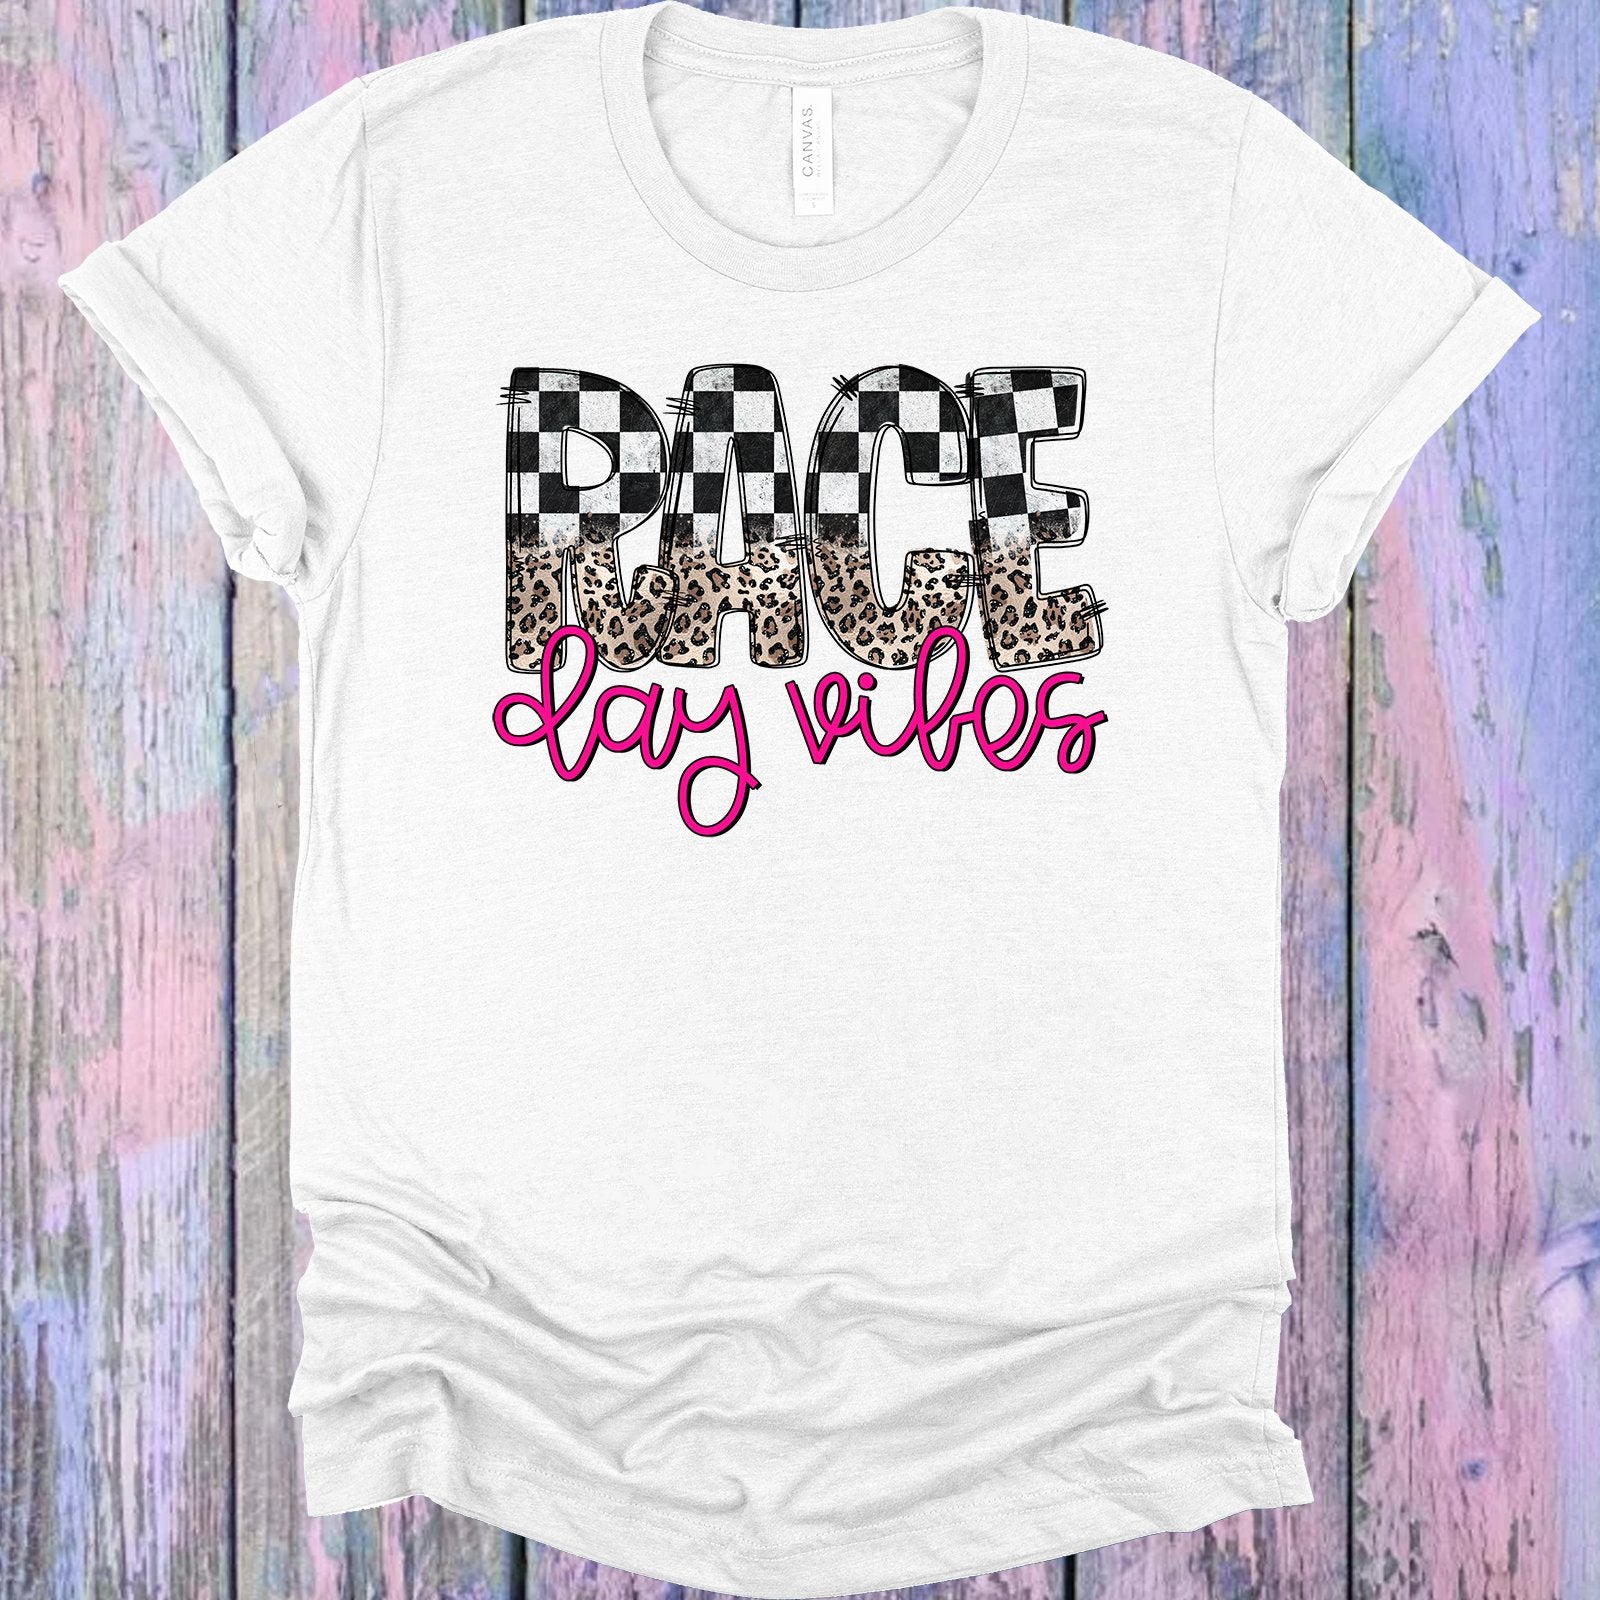 Race Day Vibes Graphic Tee Graphic Tee